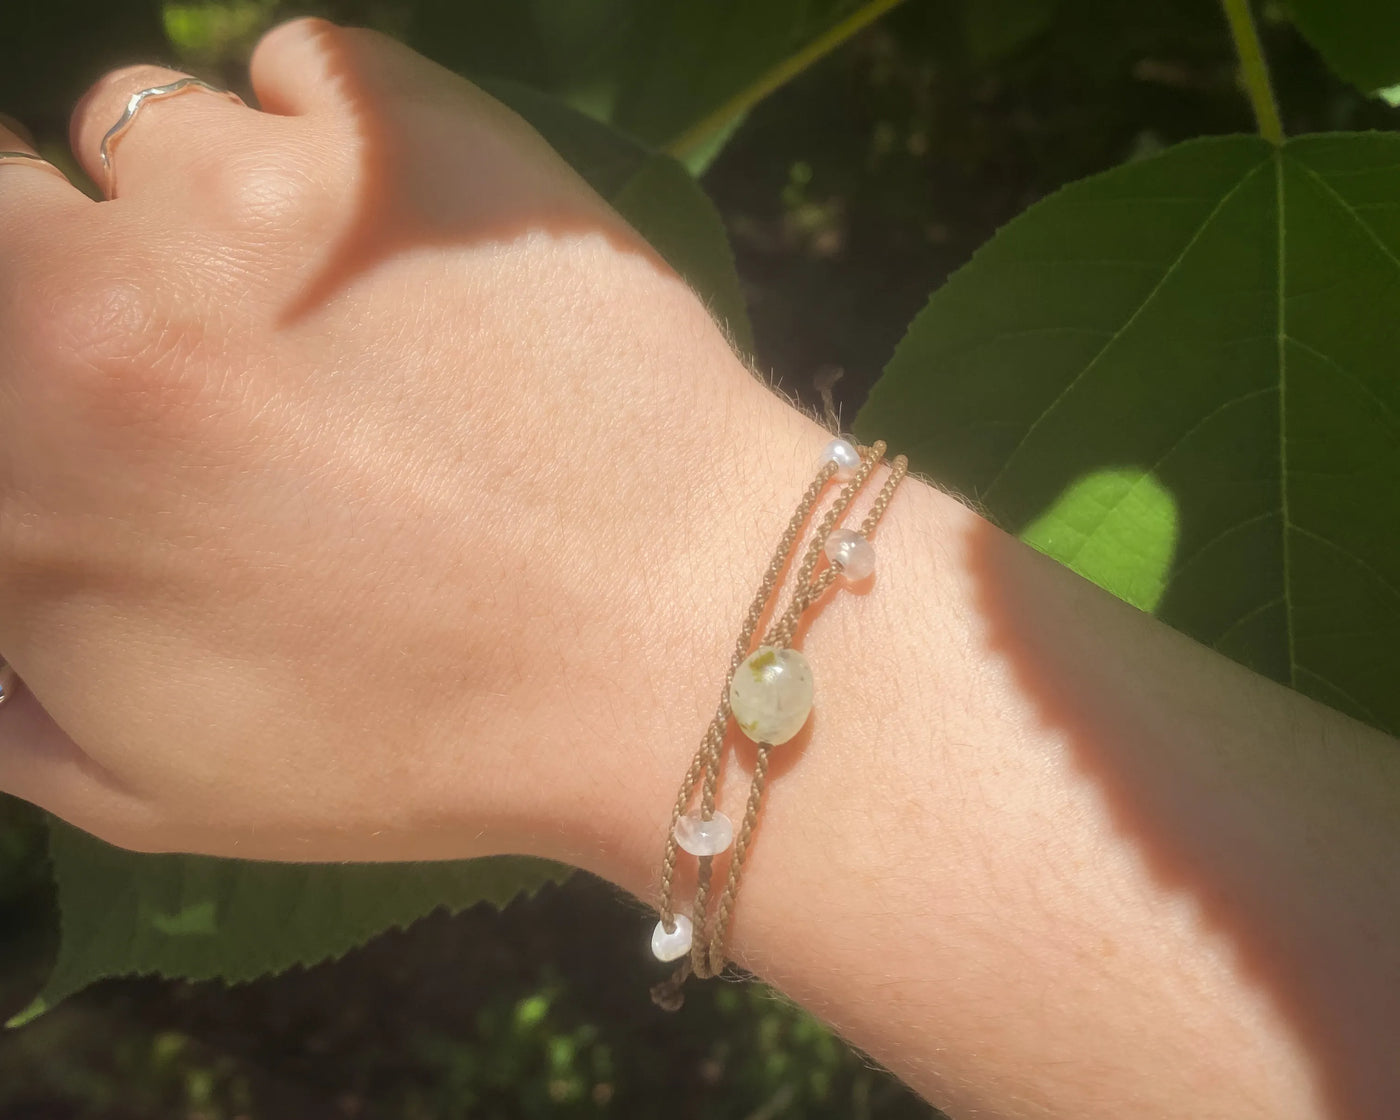 Mental Health Matters Riptide Bracelet on model's wrist with green leaves in background and sunlight